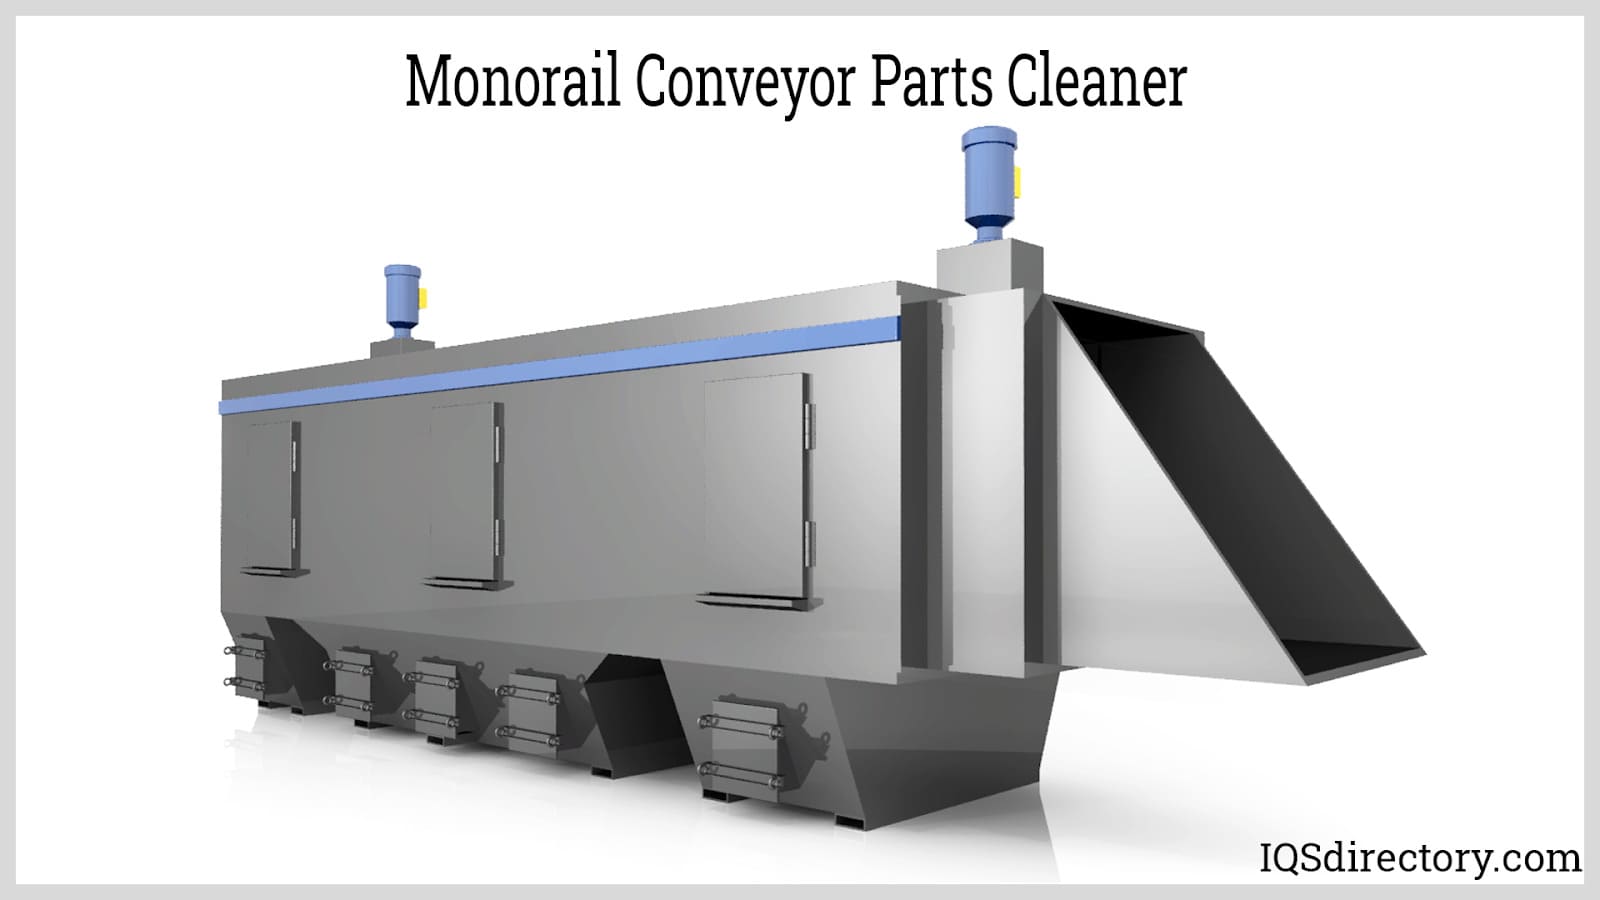 Monorail Conveyor Parts Cleaner